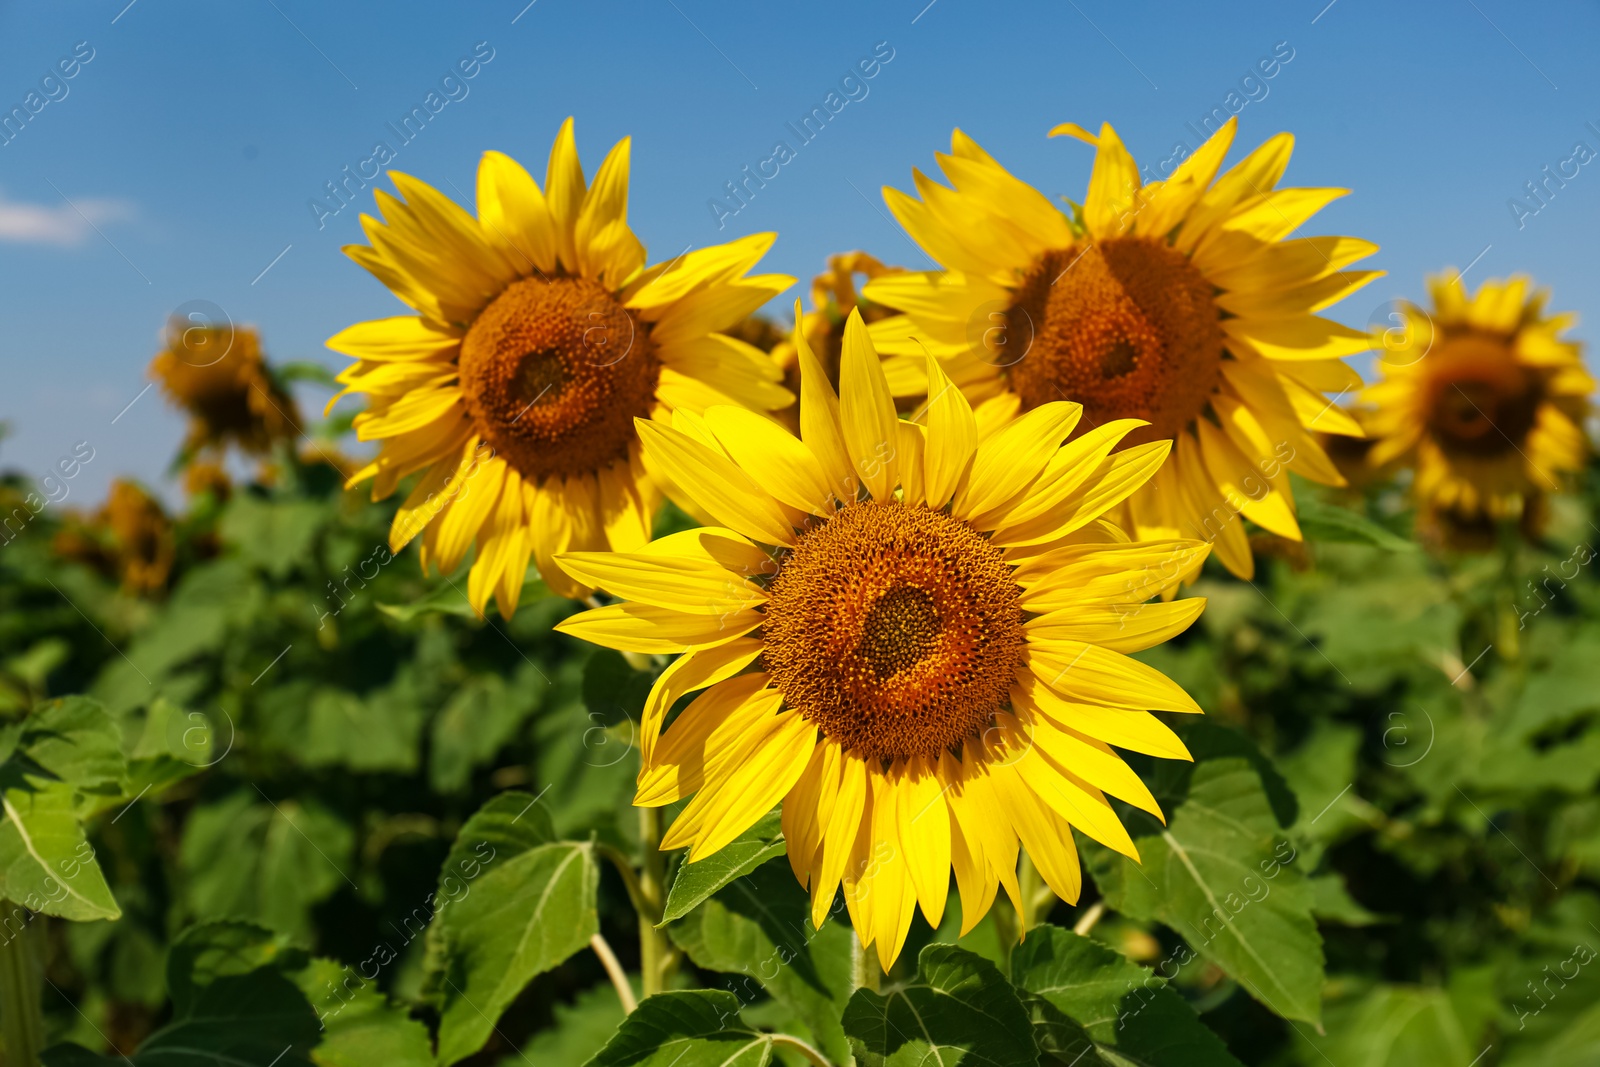 Photo of Beautiful view of sunflowers growing in field